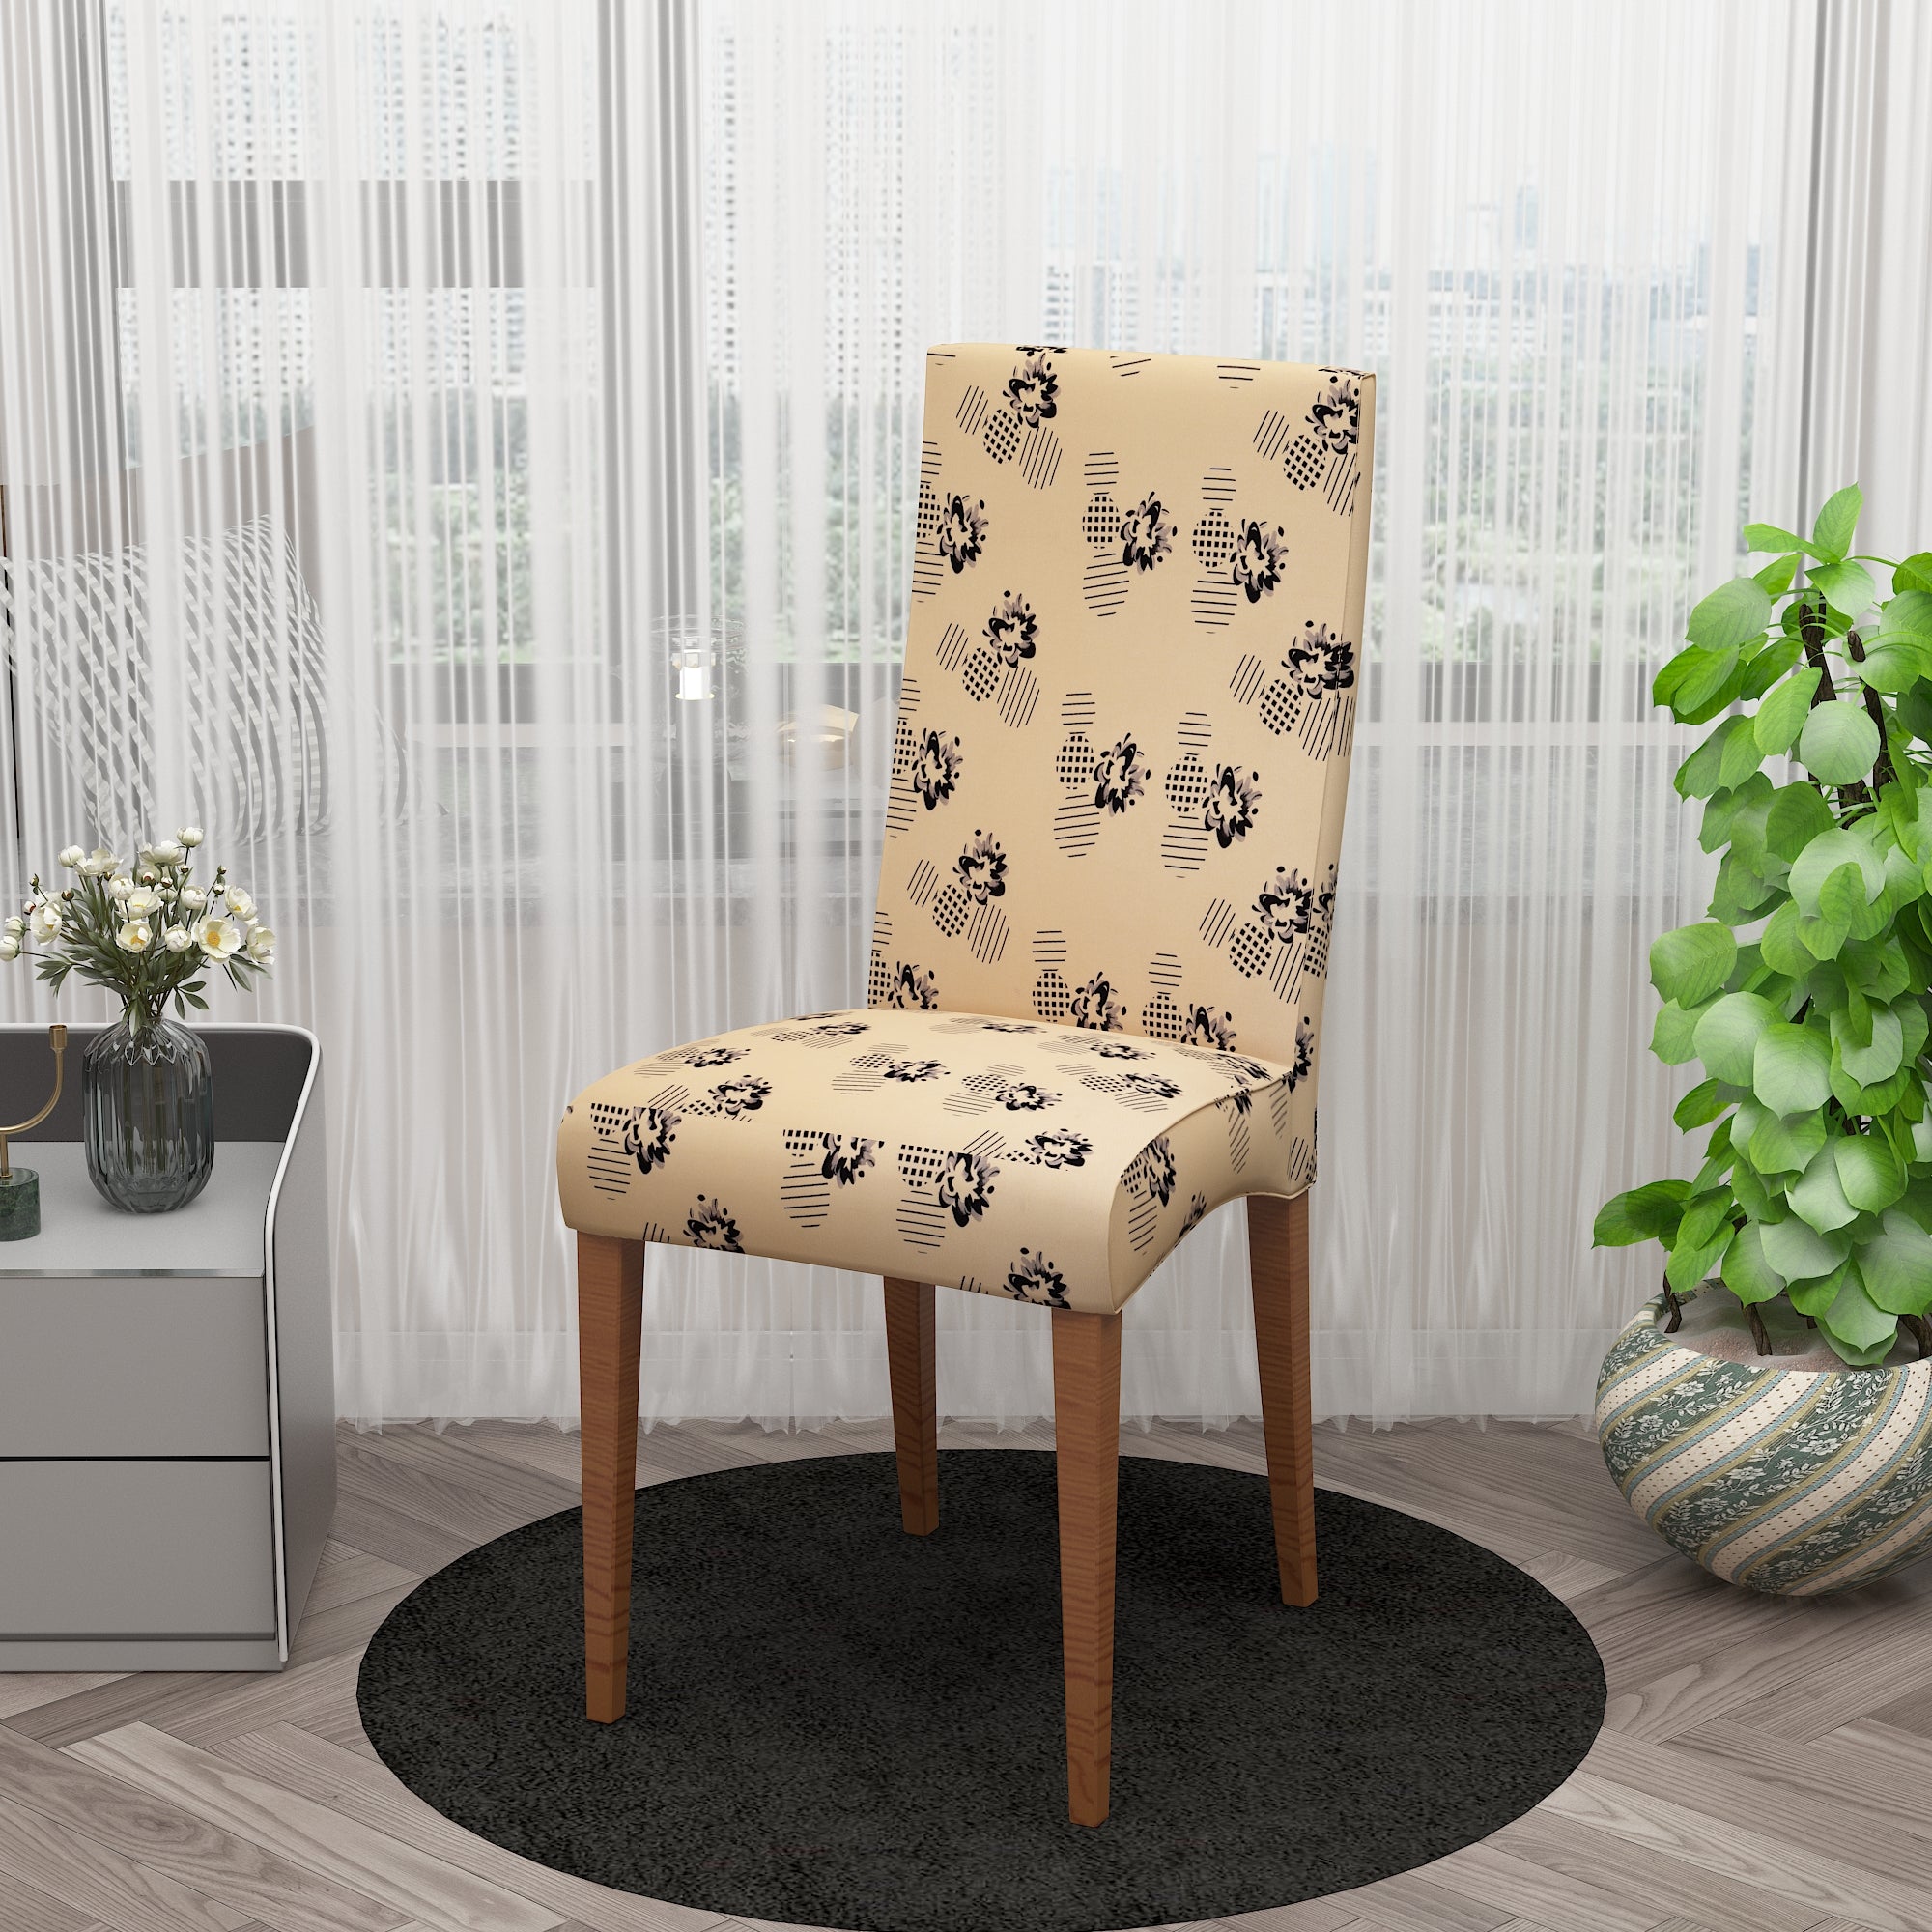 Polyester Spandex Stretchable Printed Chair Cover, MG22